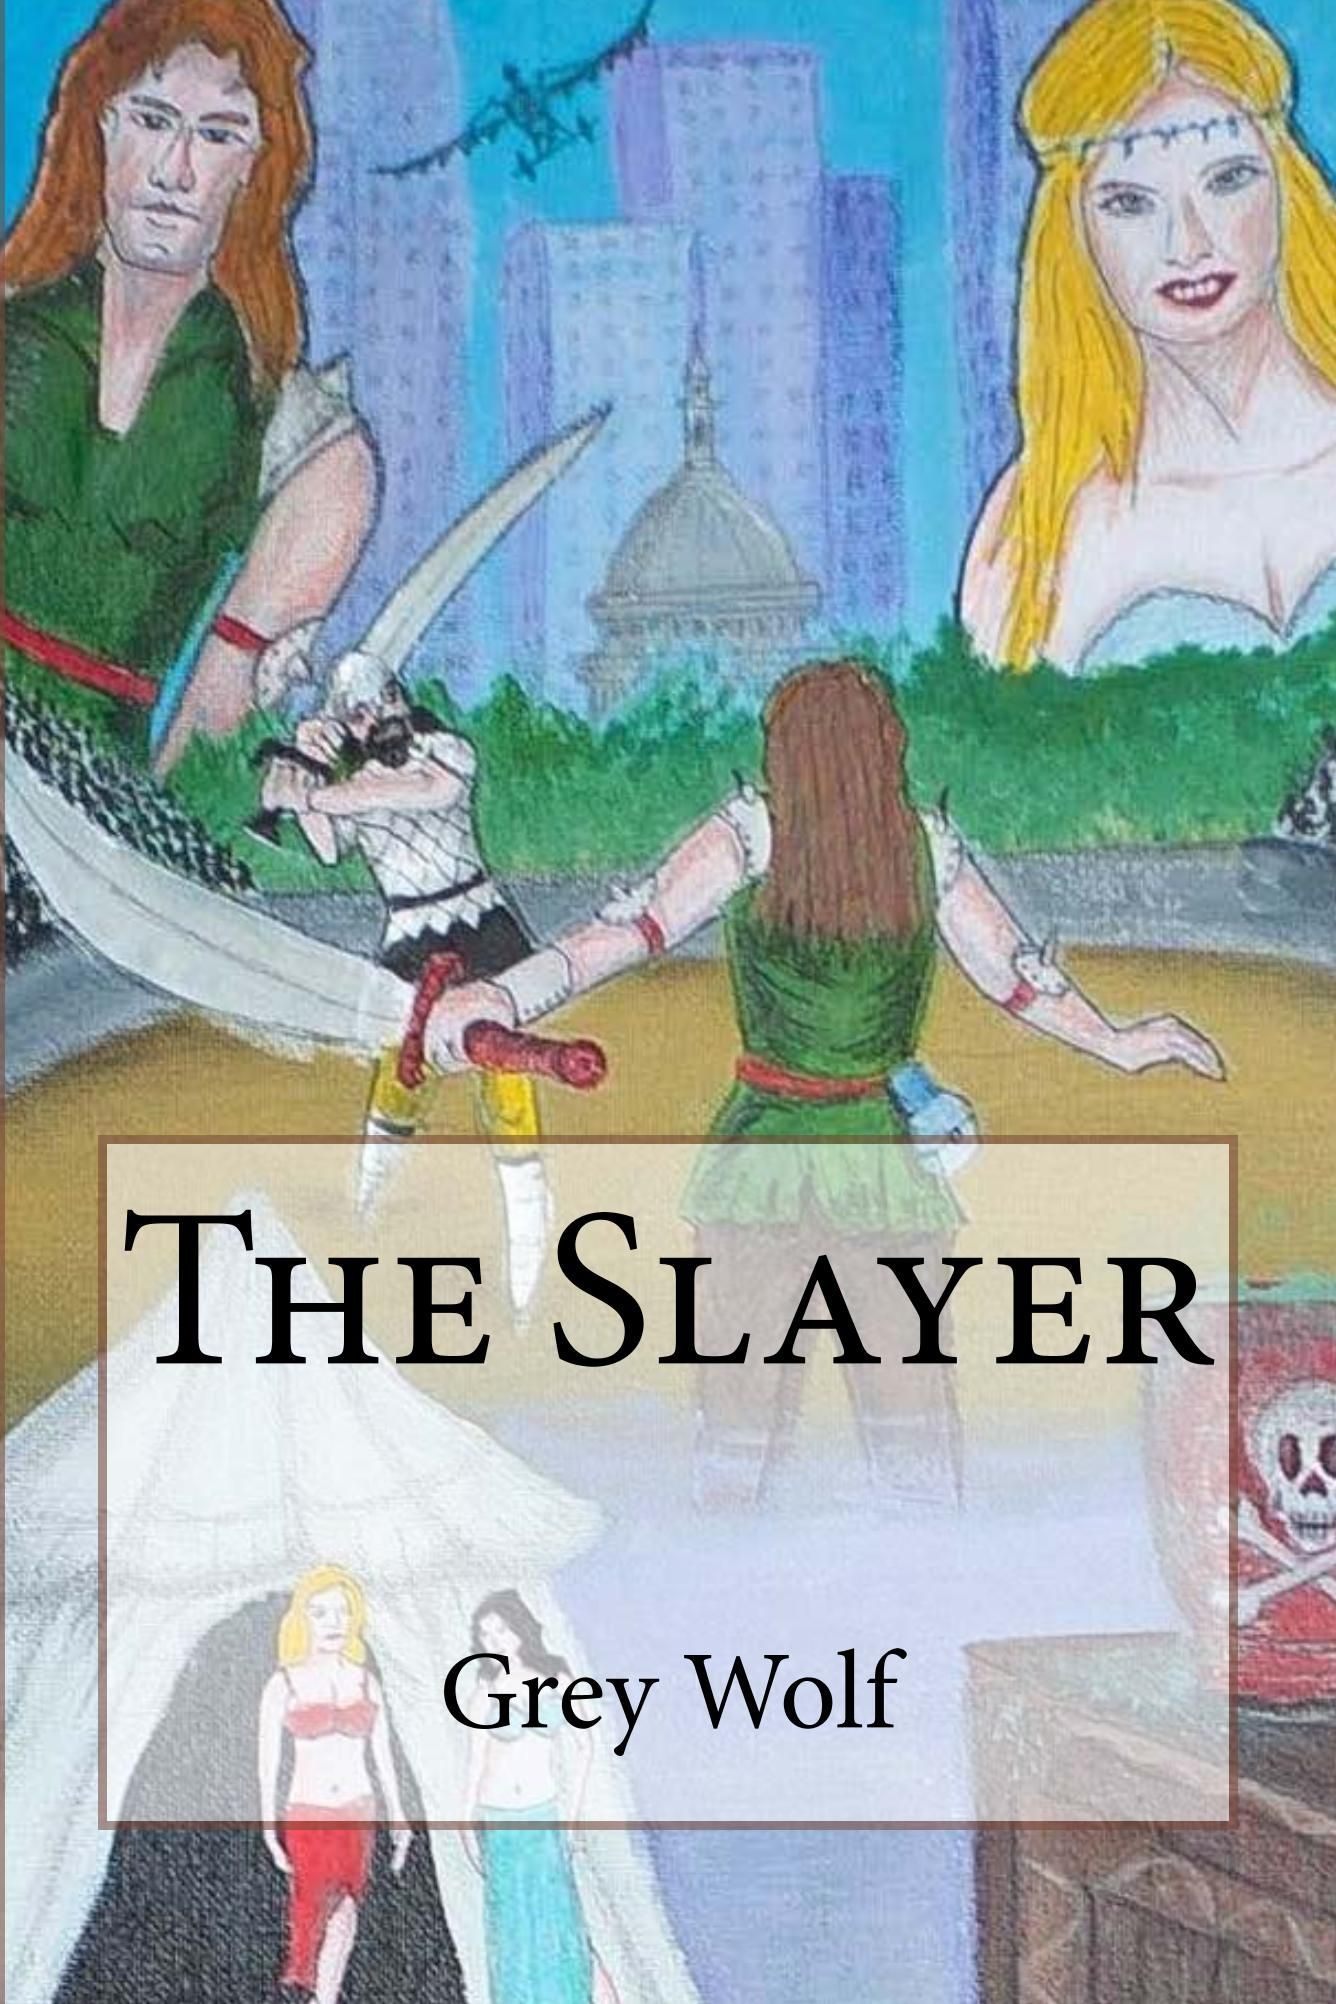 The Slayer by Grey Wolf